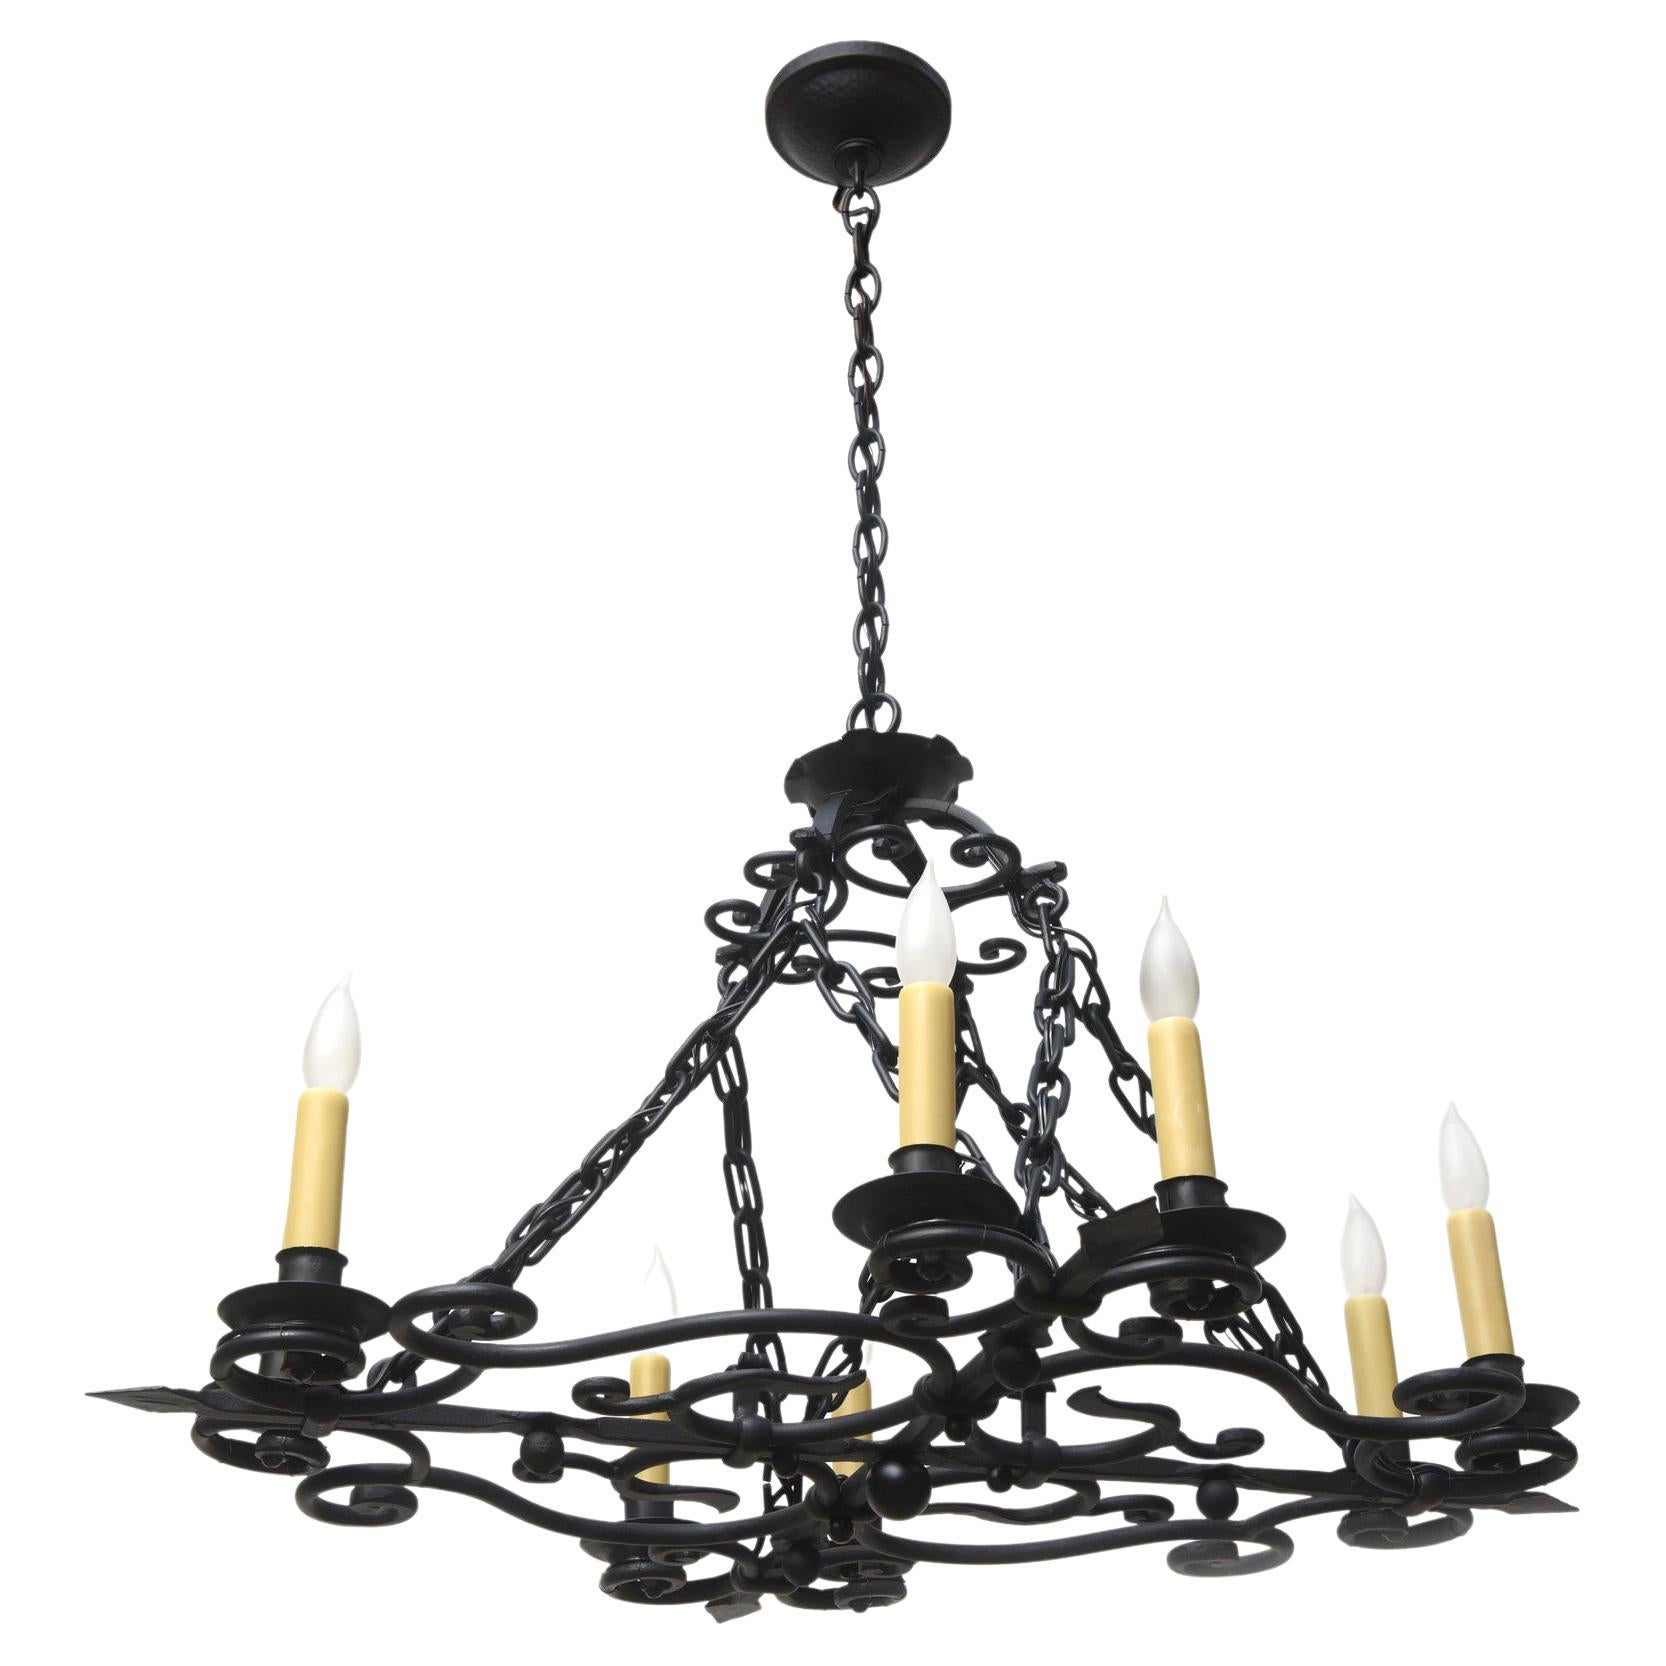 Wrought Iron Oblong Candle Chandelier